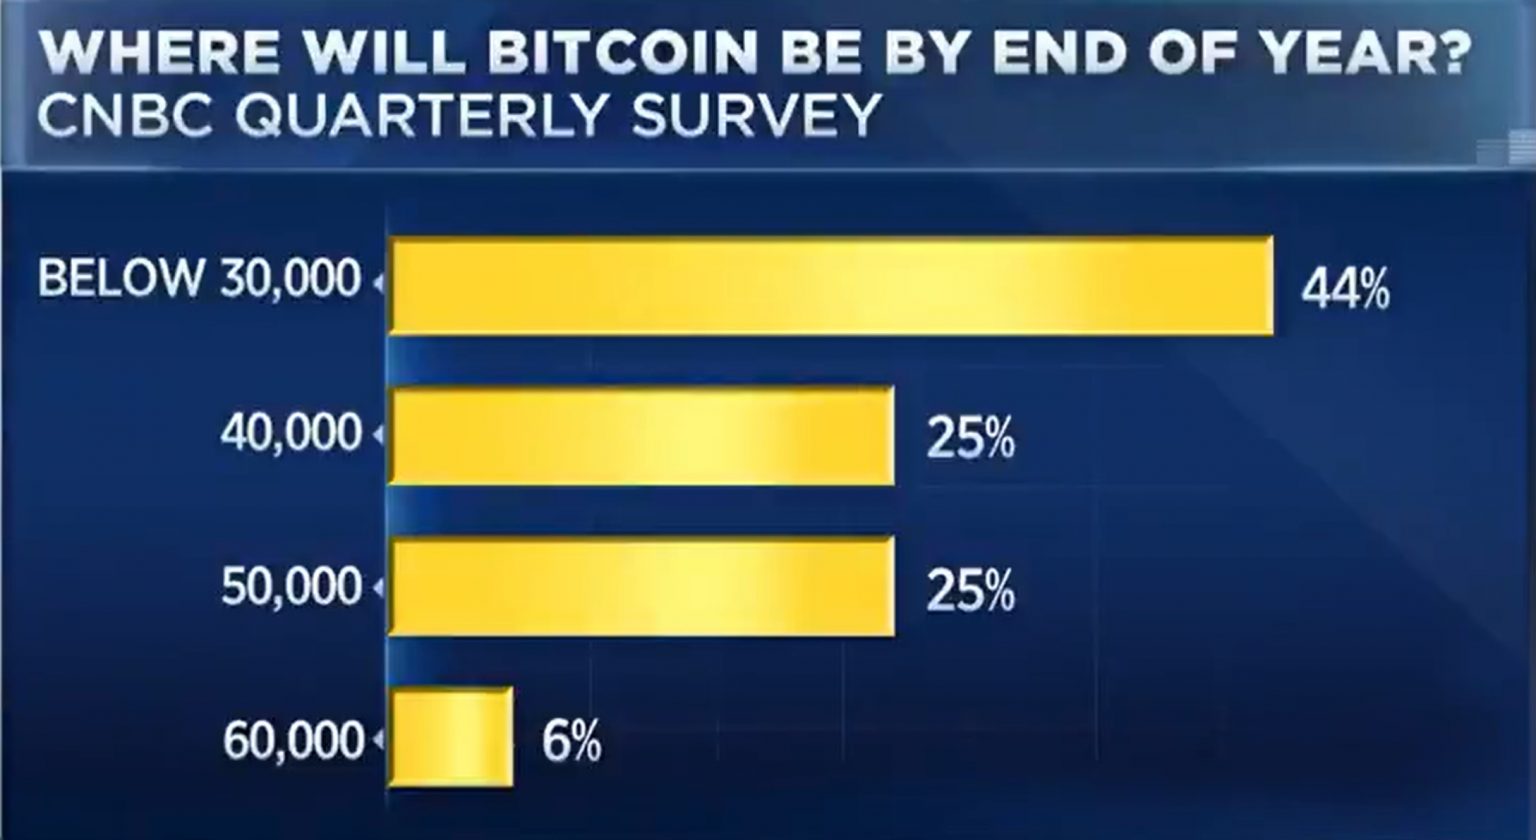 Bitcoin price expectations at the end of the year for capital strategists and portfolio managers